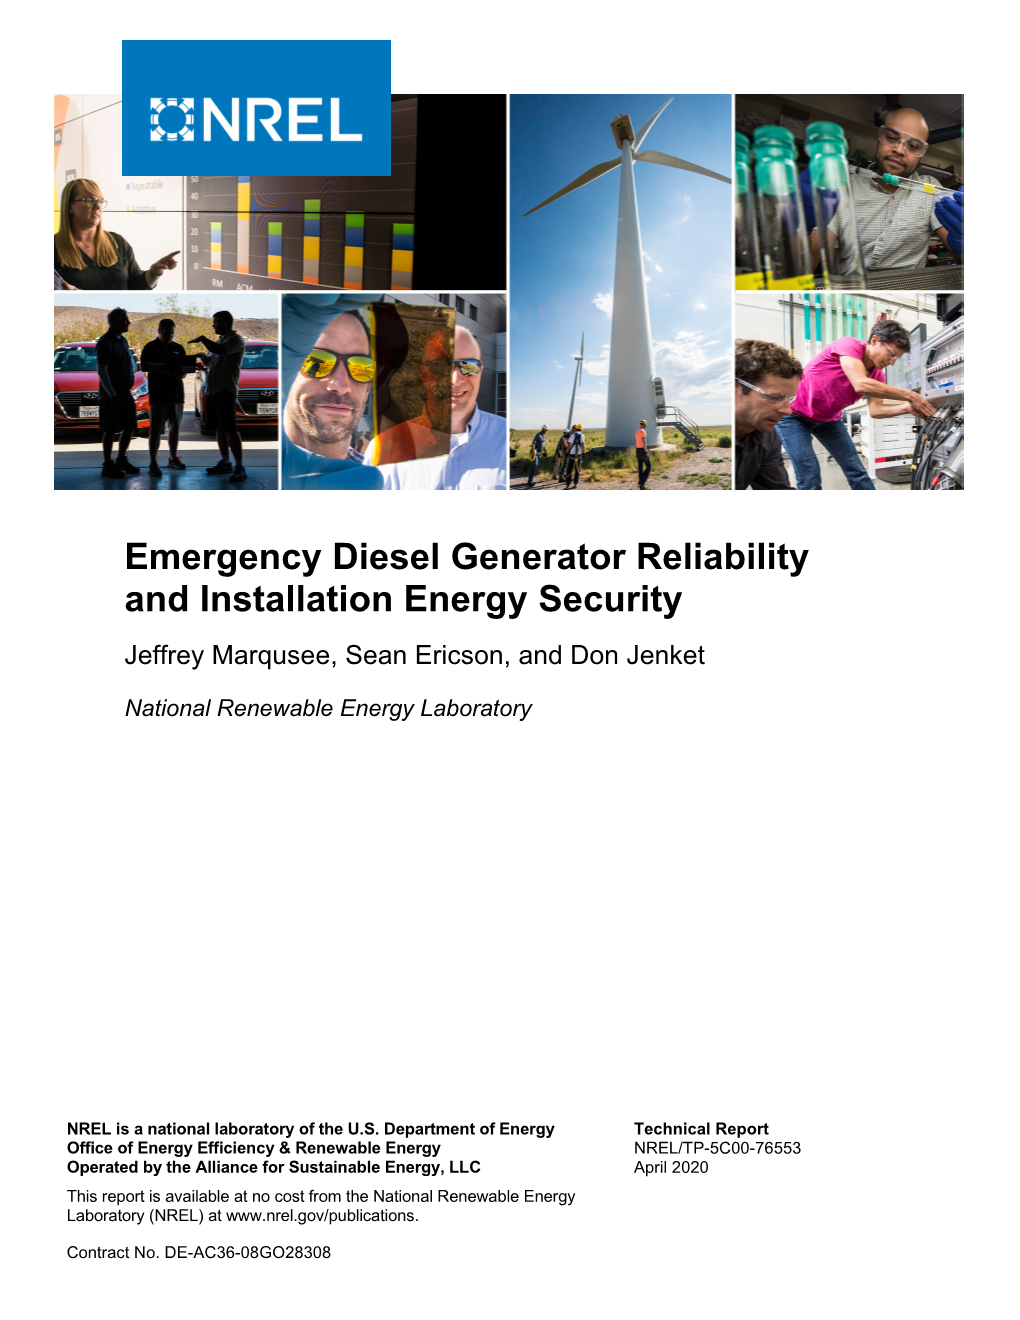 Emergency Diesel Generator Reliability and Installation Energy Security